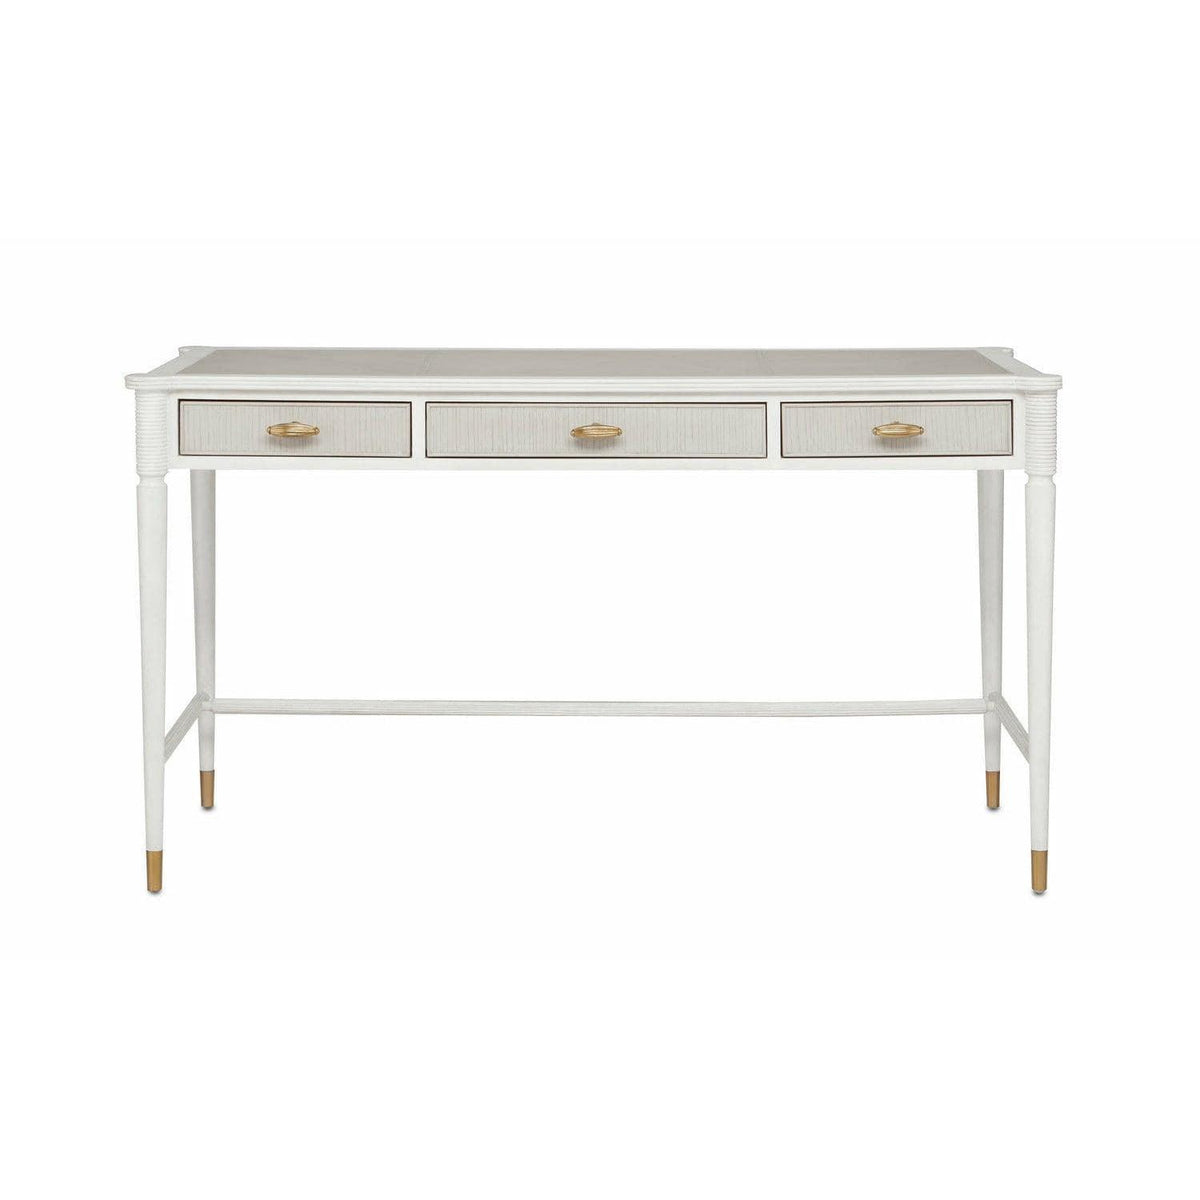 Currey and Company - Aster Desk - 3000-0190 | Montreal Lighting & Hardware